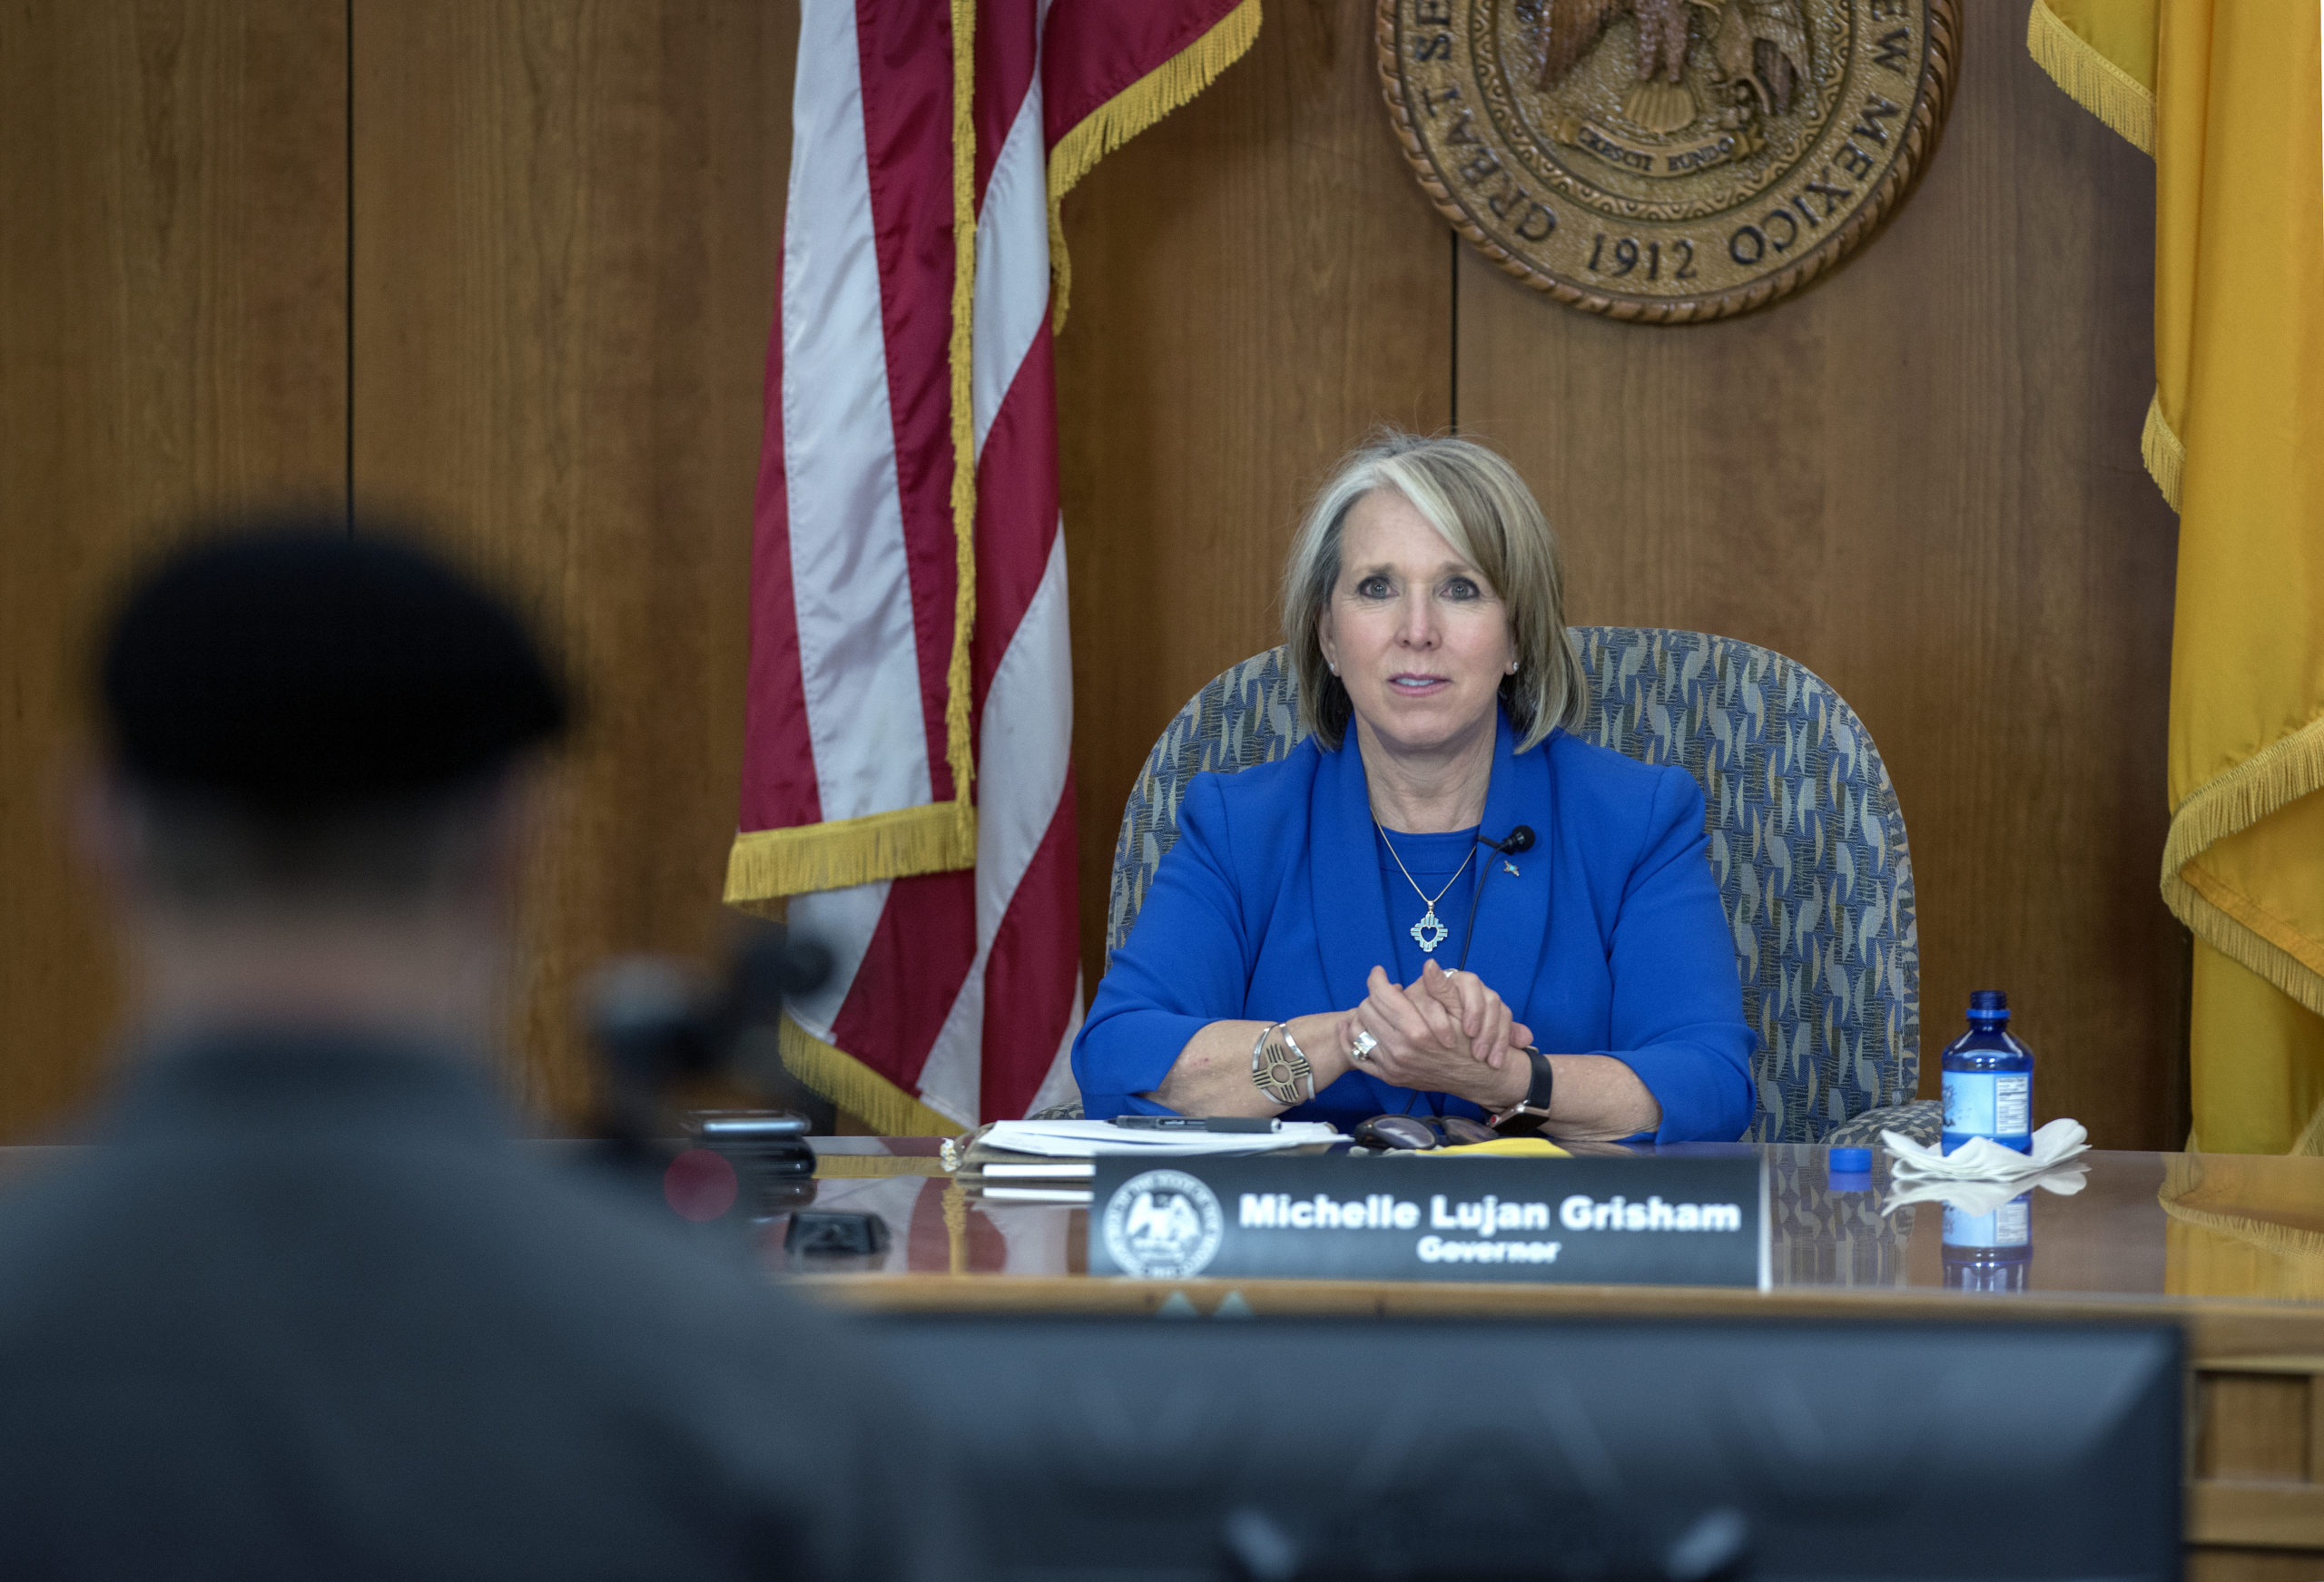 Lujan Grisham gives update on COVID-19 response, unemployment, small business